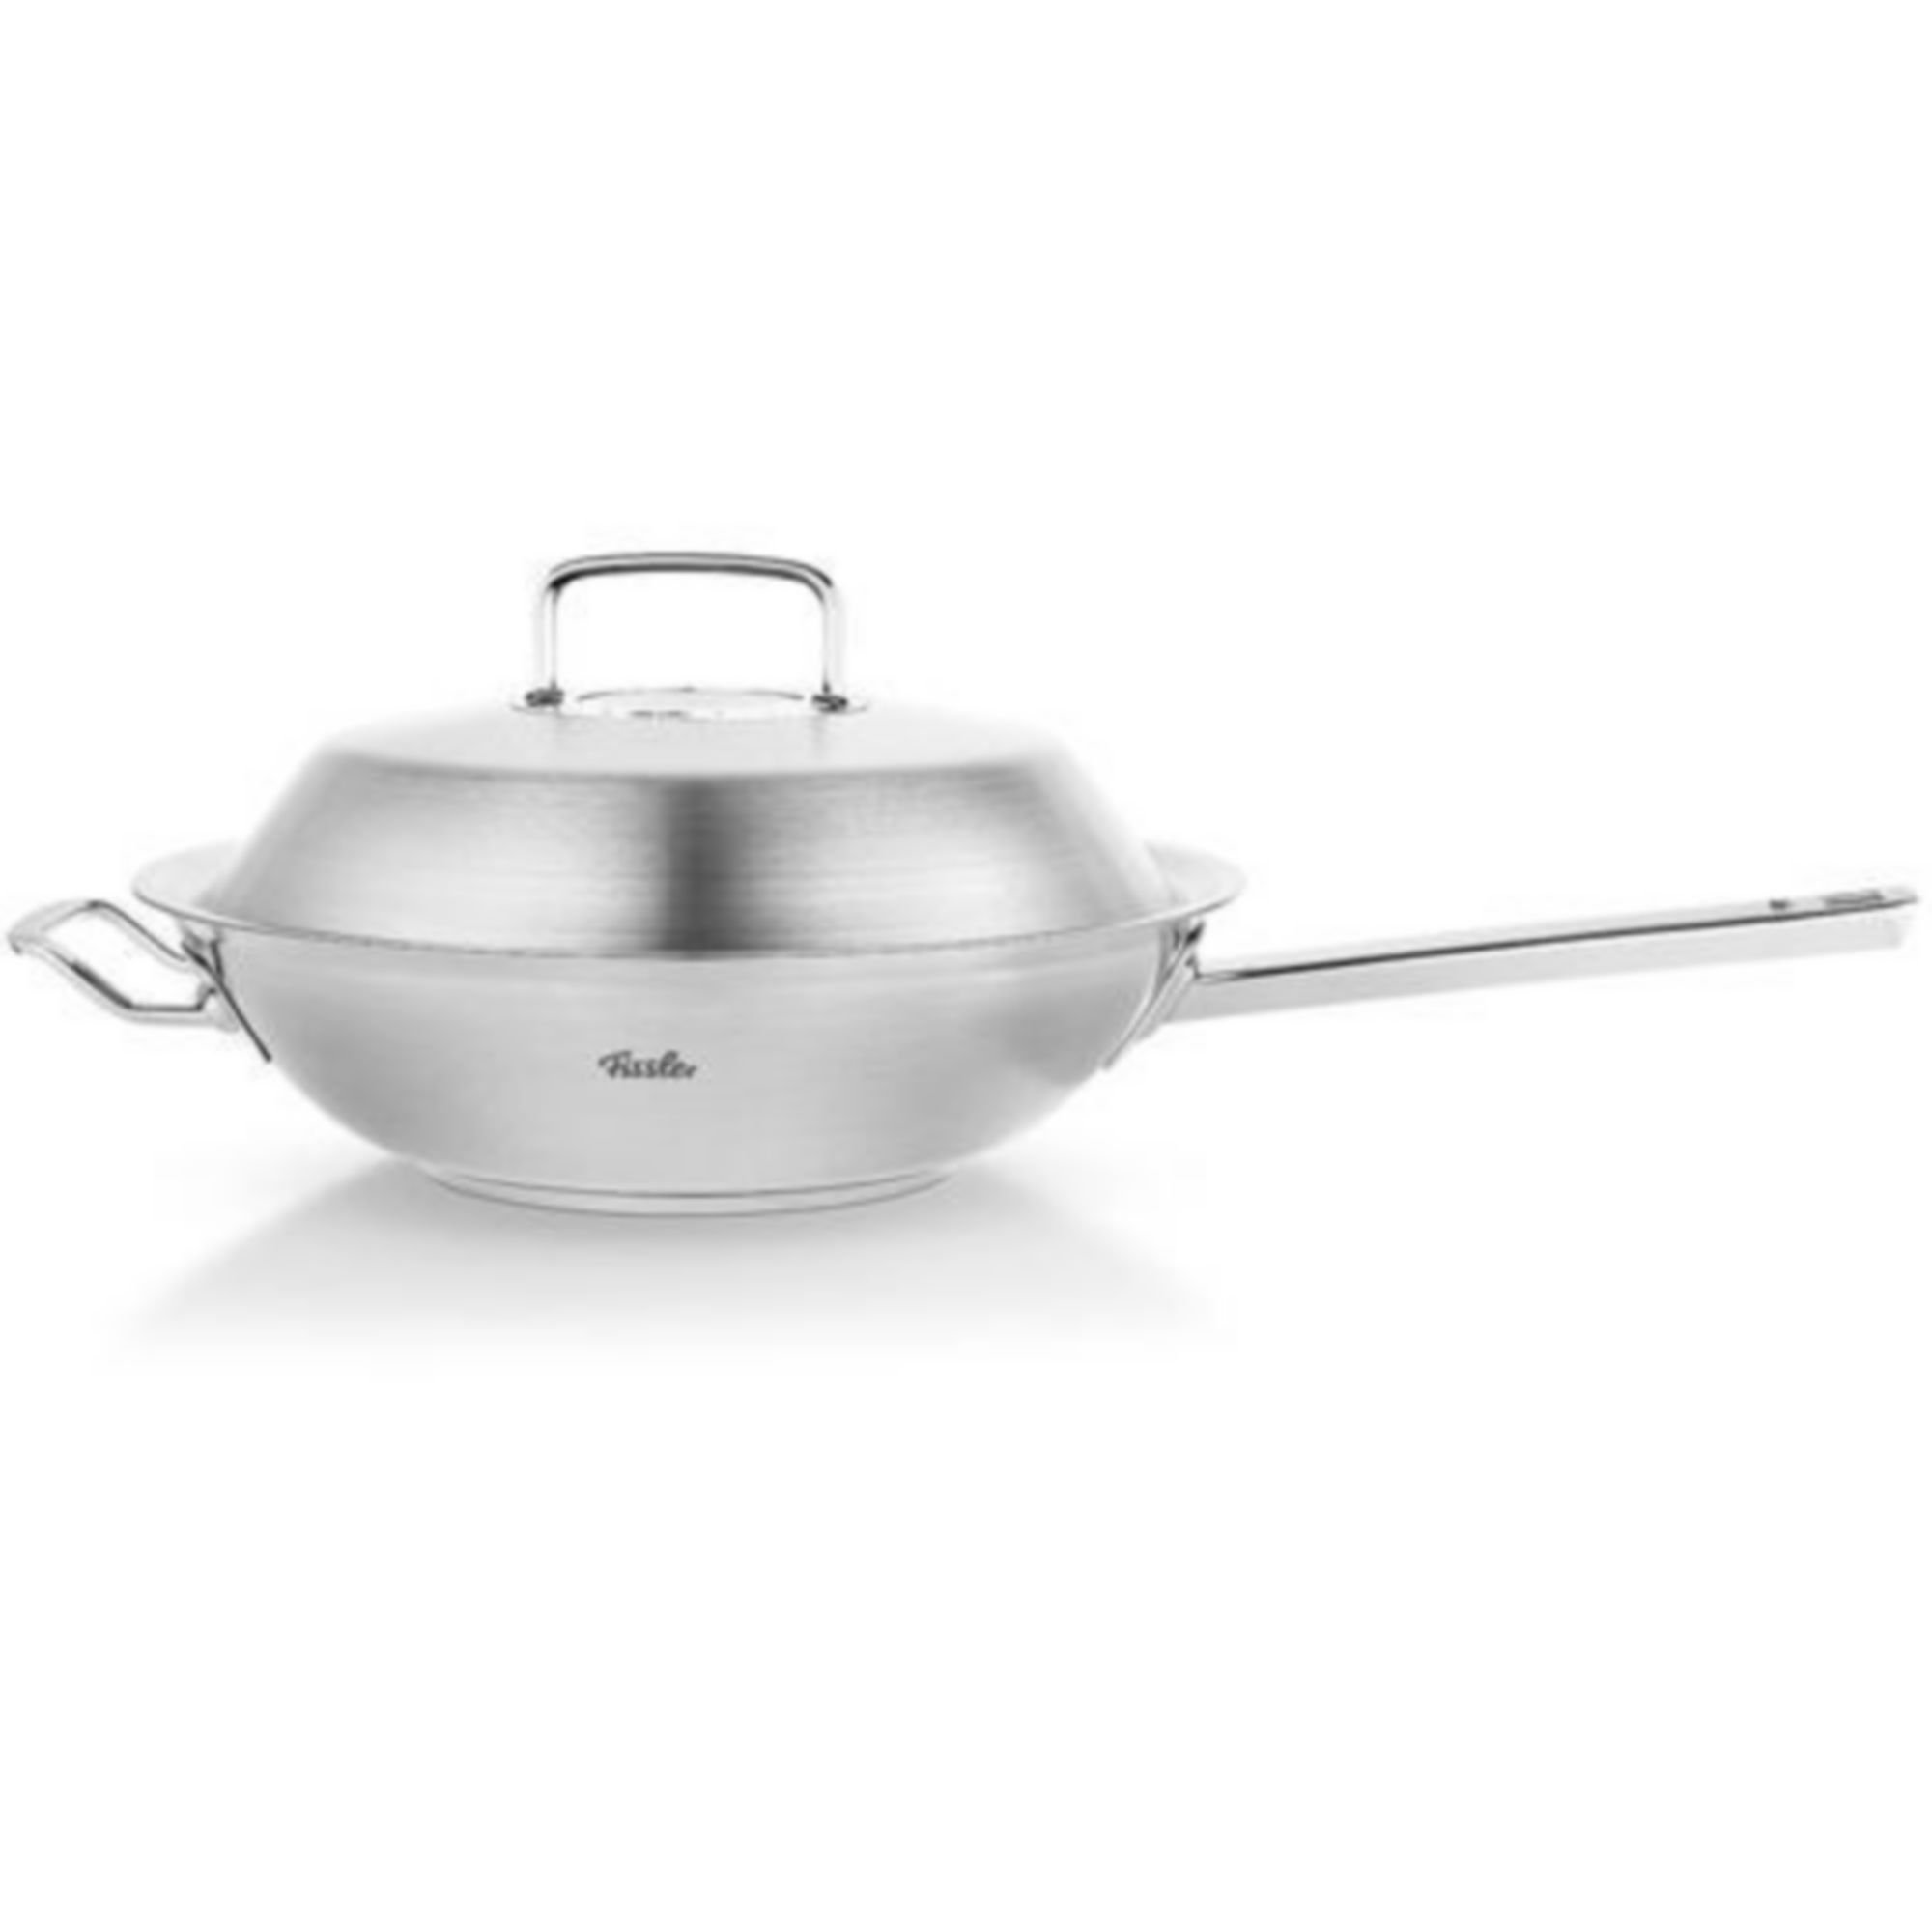 Fissler Original-Profi | Reviews Stainless 12-Inch Wok Lid, Collection® With & Wayfair Steel